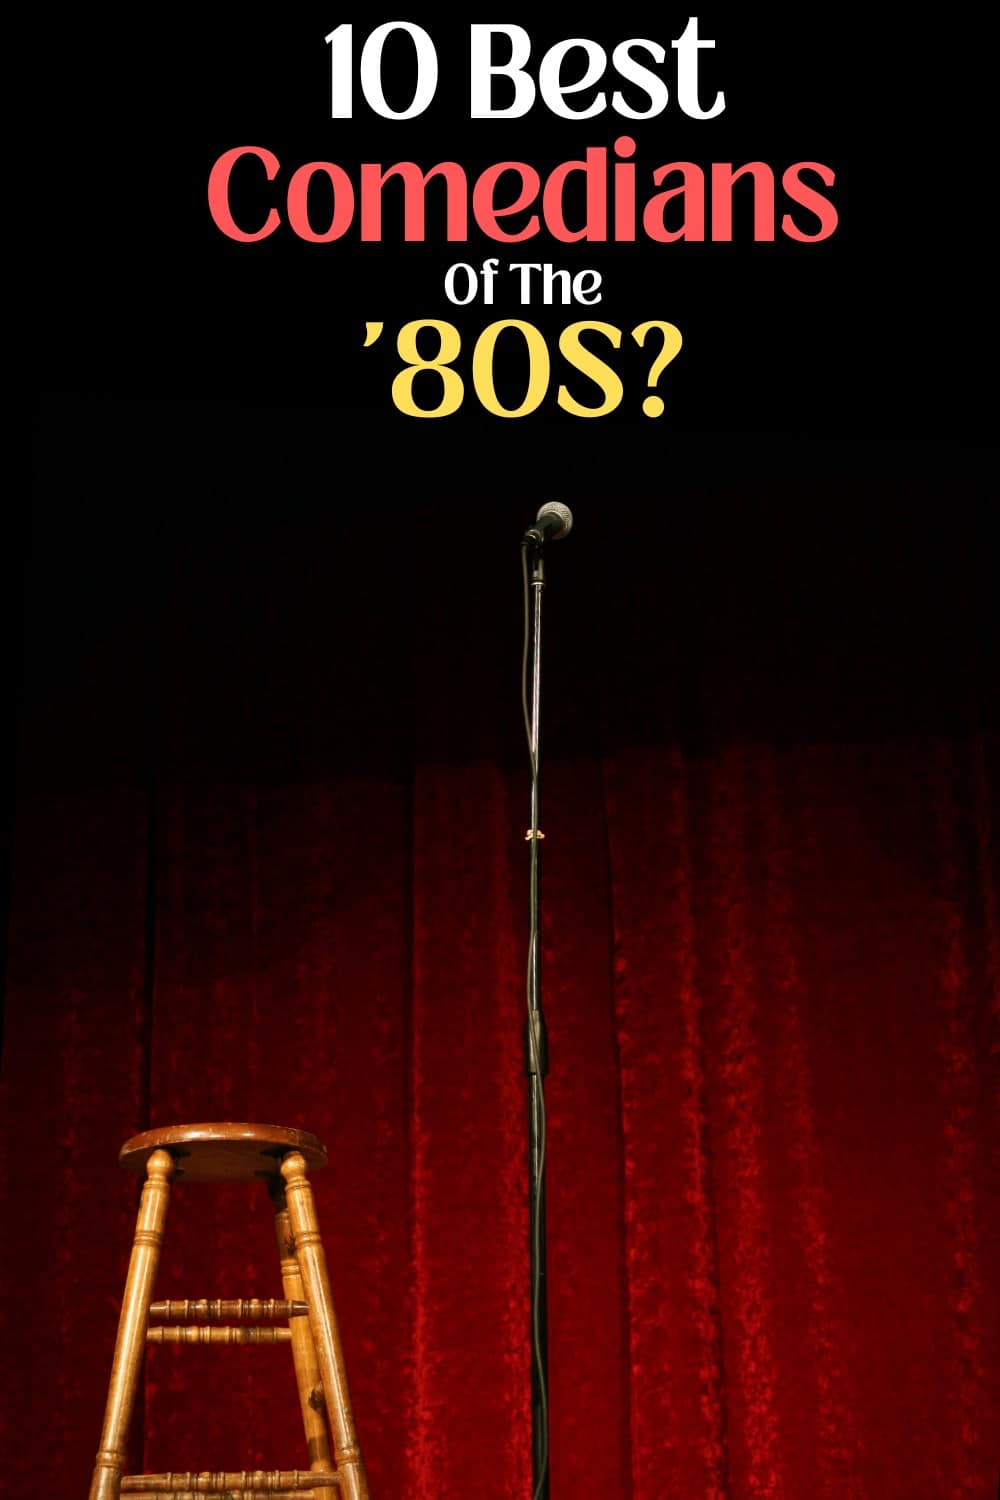 Who is the best Comedian Of The 80S?